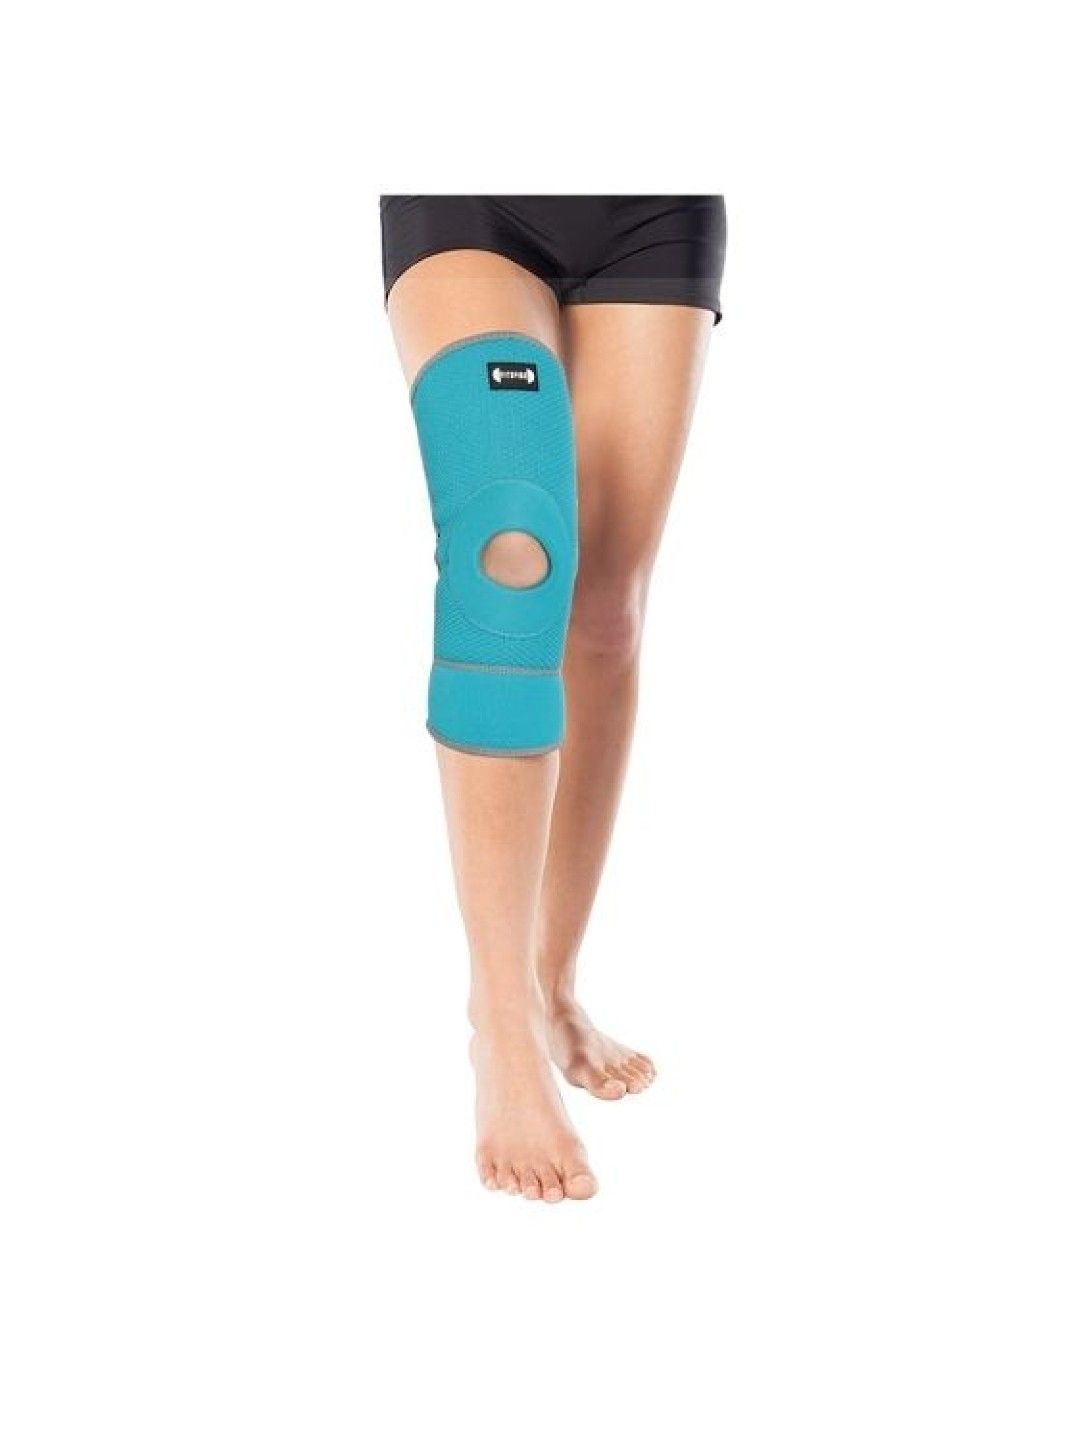 Sunbeams Lifestyle Fitspire Knee Support Small Exercise/Fitness/Gym/Workout Equipment (No Color- Image 1)